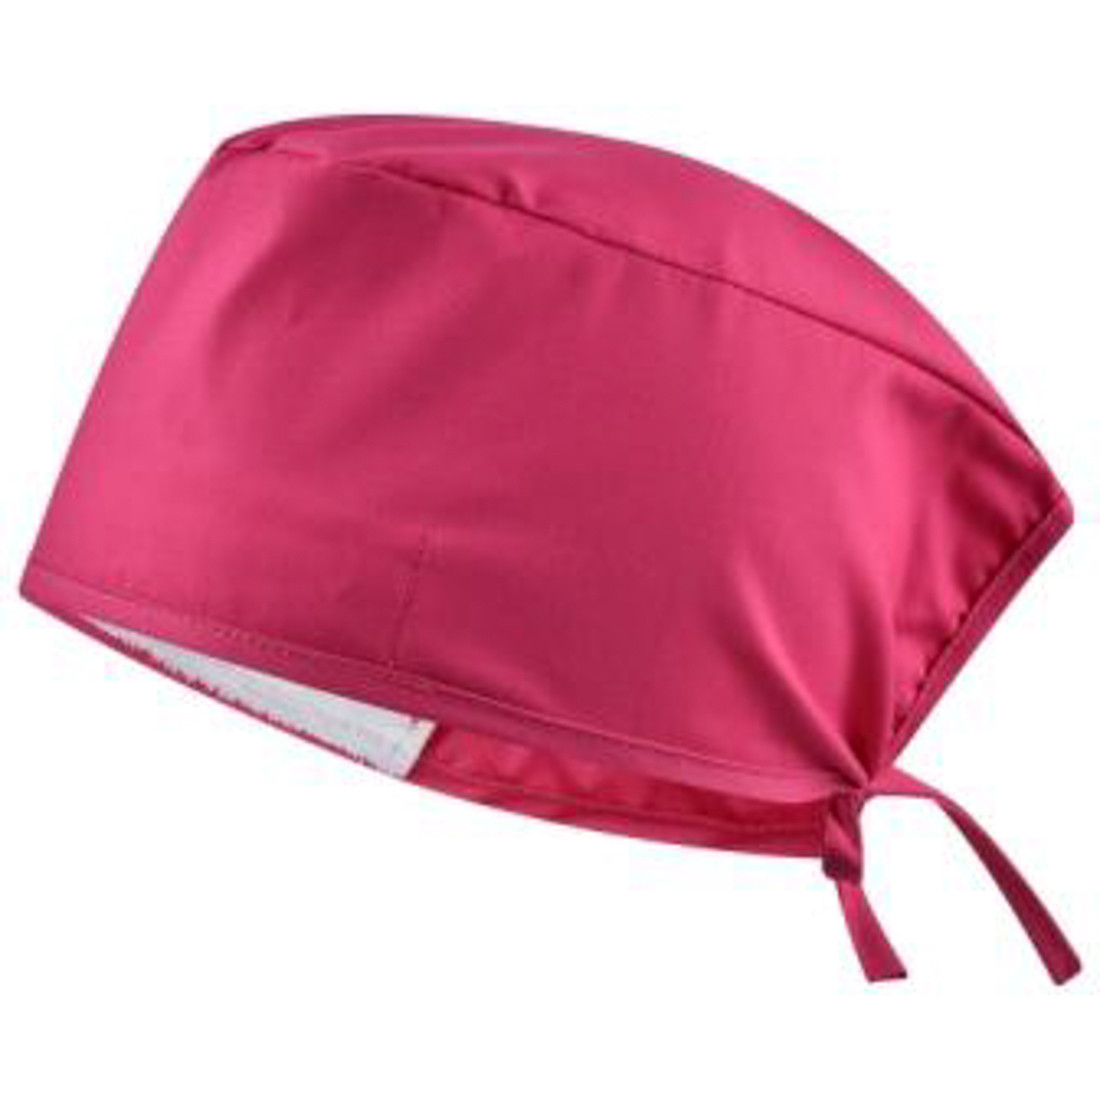 ADELINA Surgical Cap - Safetywear